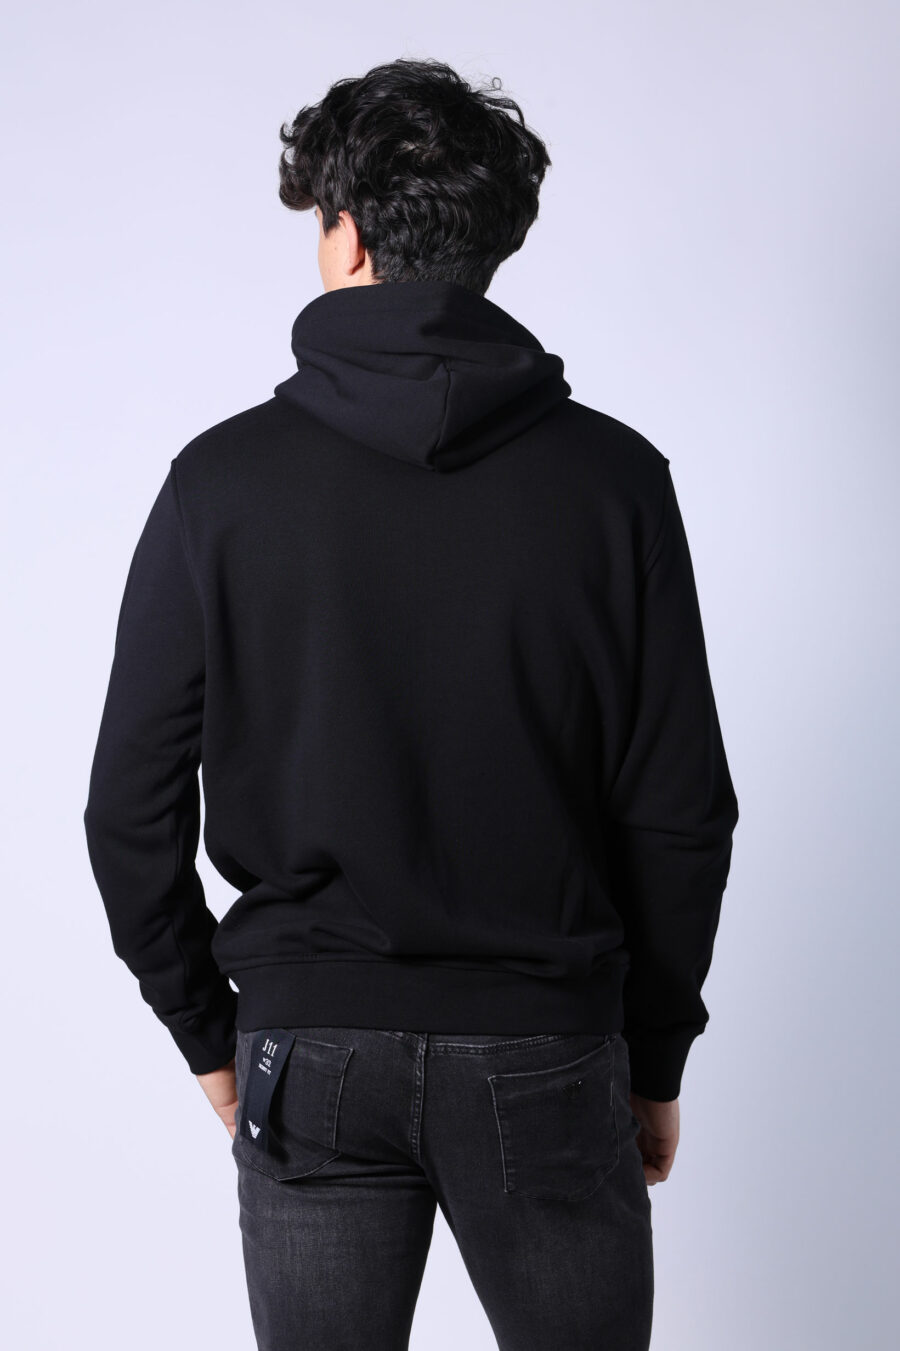 Black hooded sweatshirt with zips and rubber minilogue - Untitled Catalog 05742